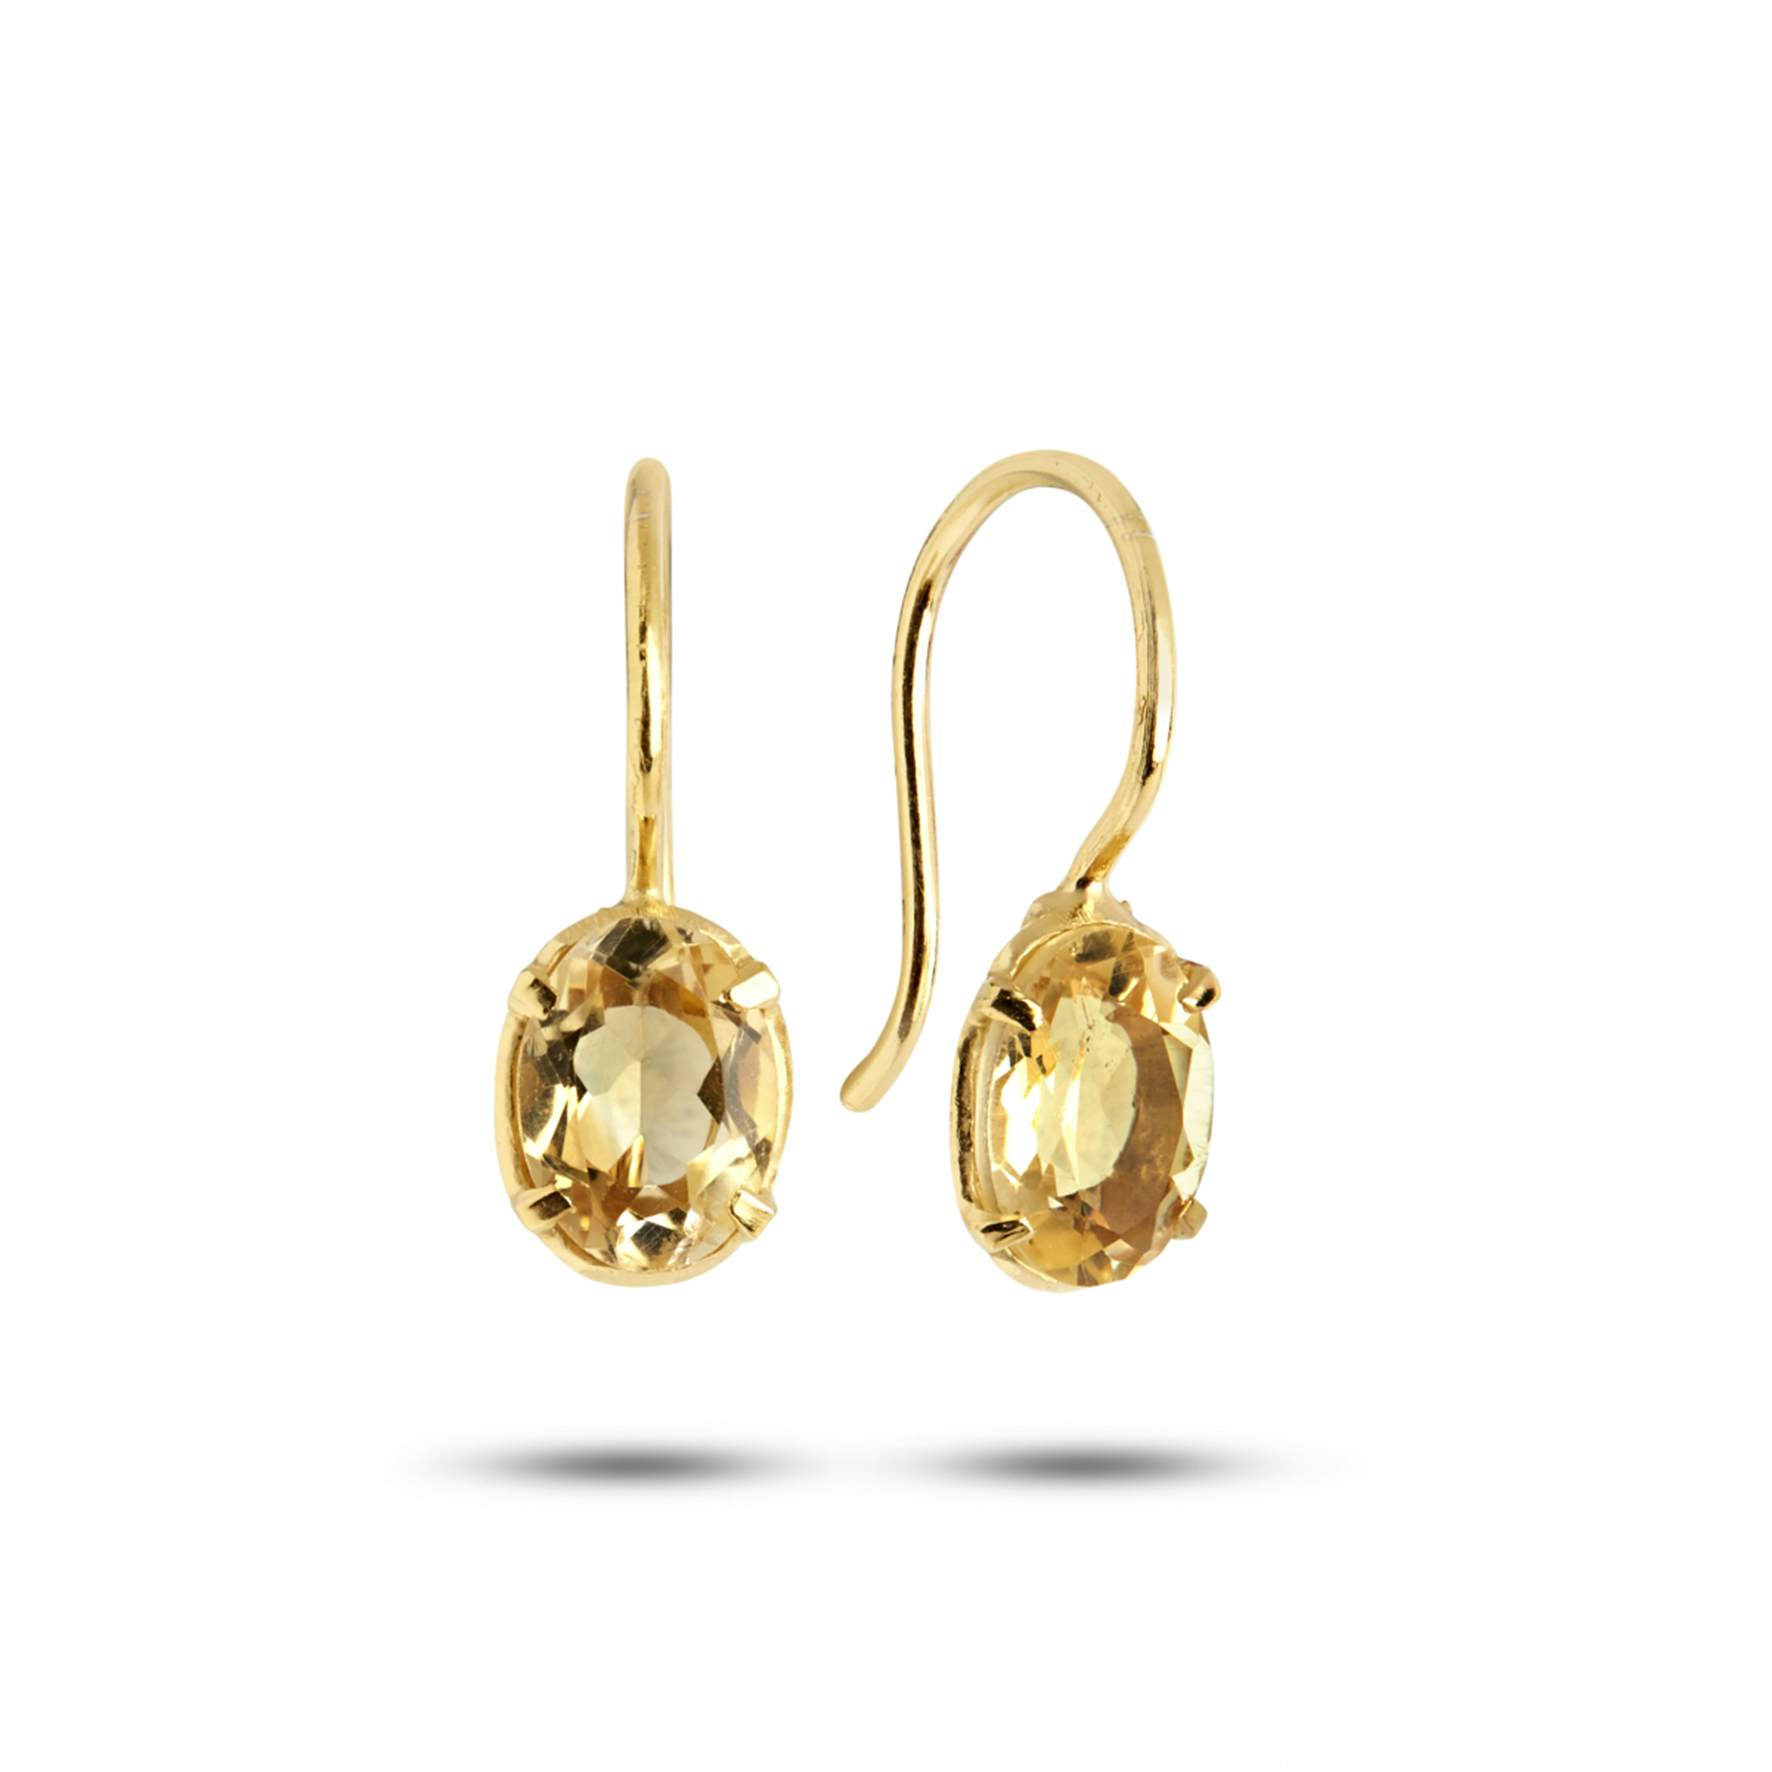 Gem Candy Earrings Happiness from Carré in Goldplated-Silver Sterling 925|